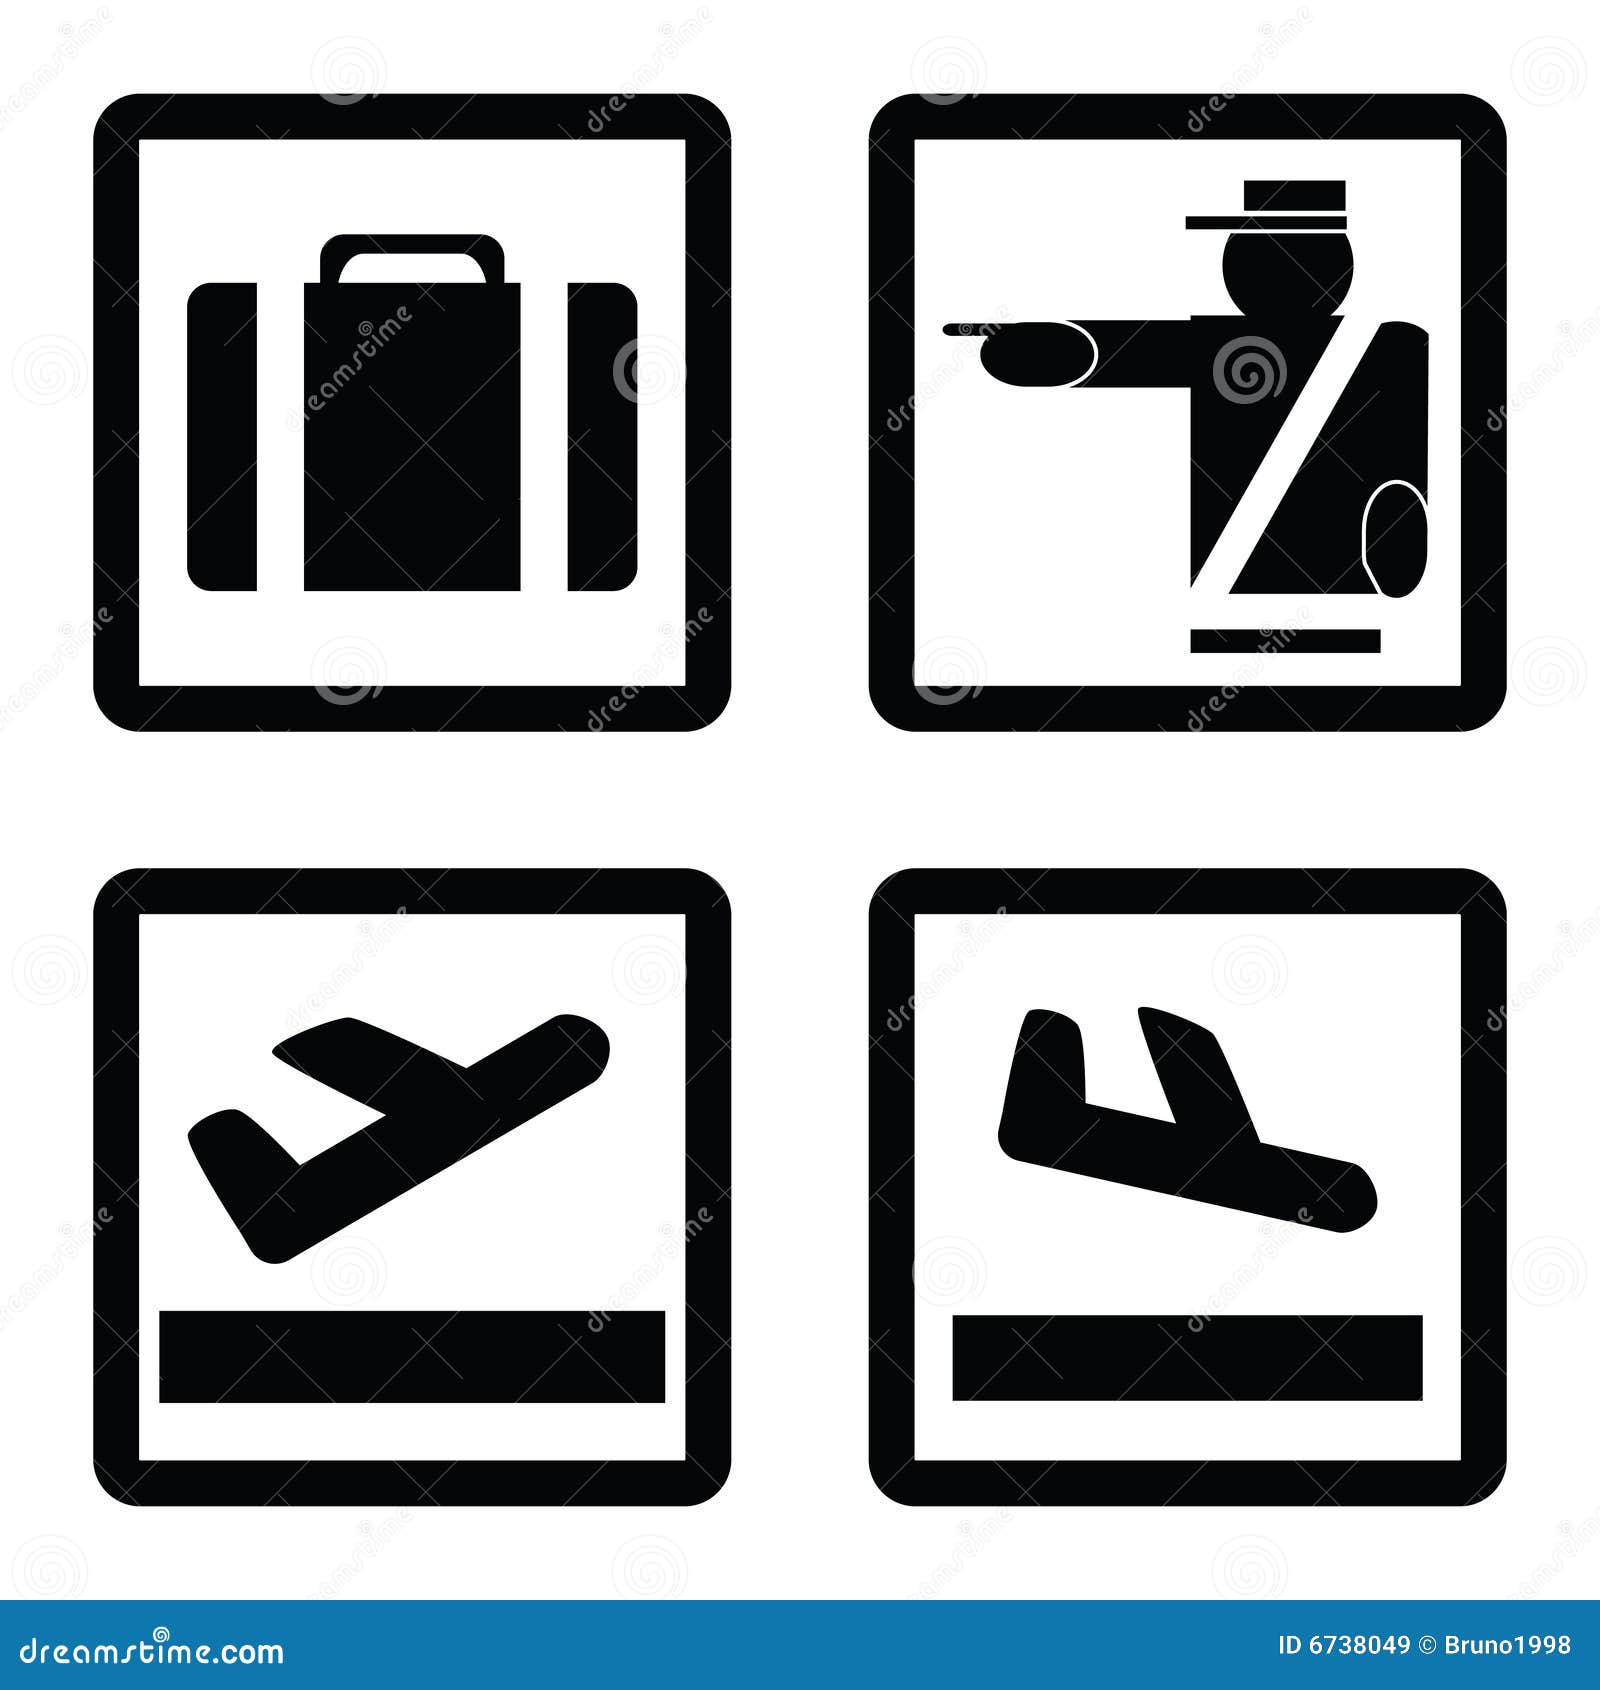 airport signs clipart - photo #23